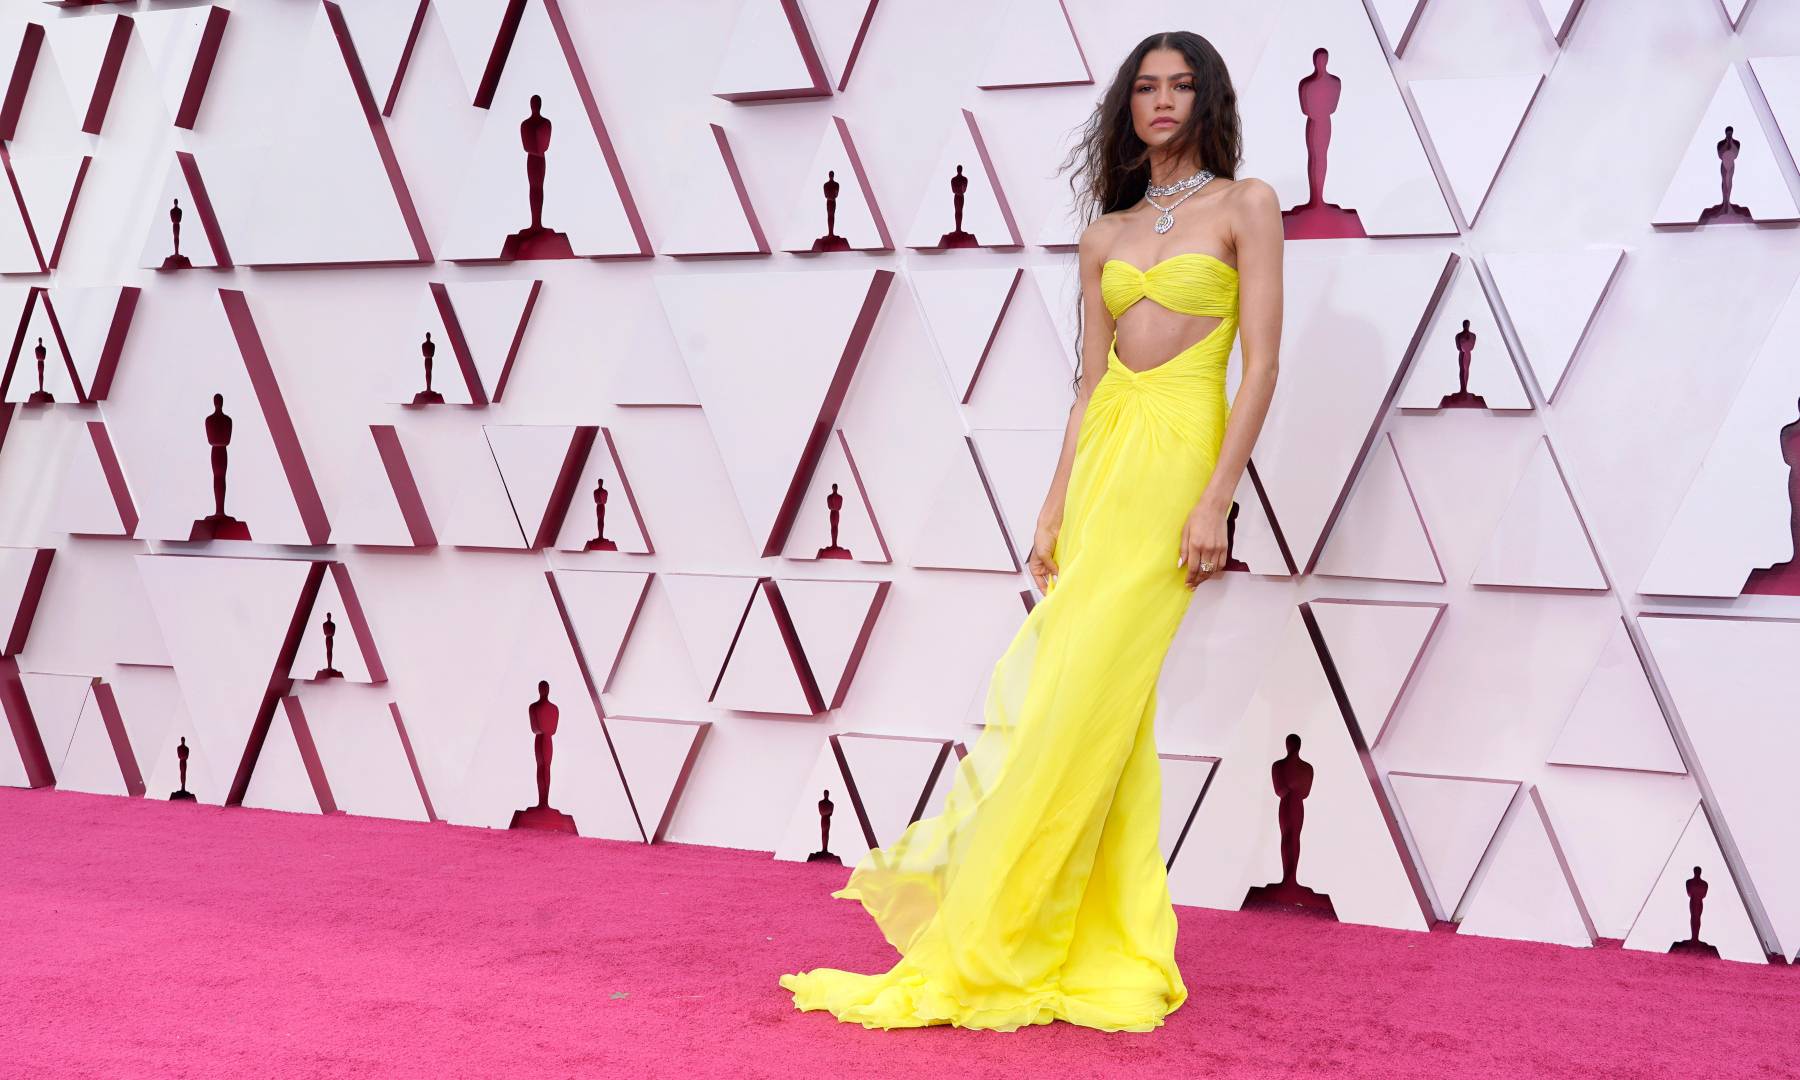 Zendaya poses on a socially-distant red carpet at the 2021 Academy Awards.